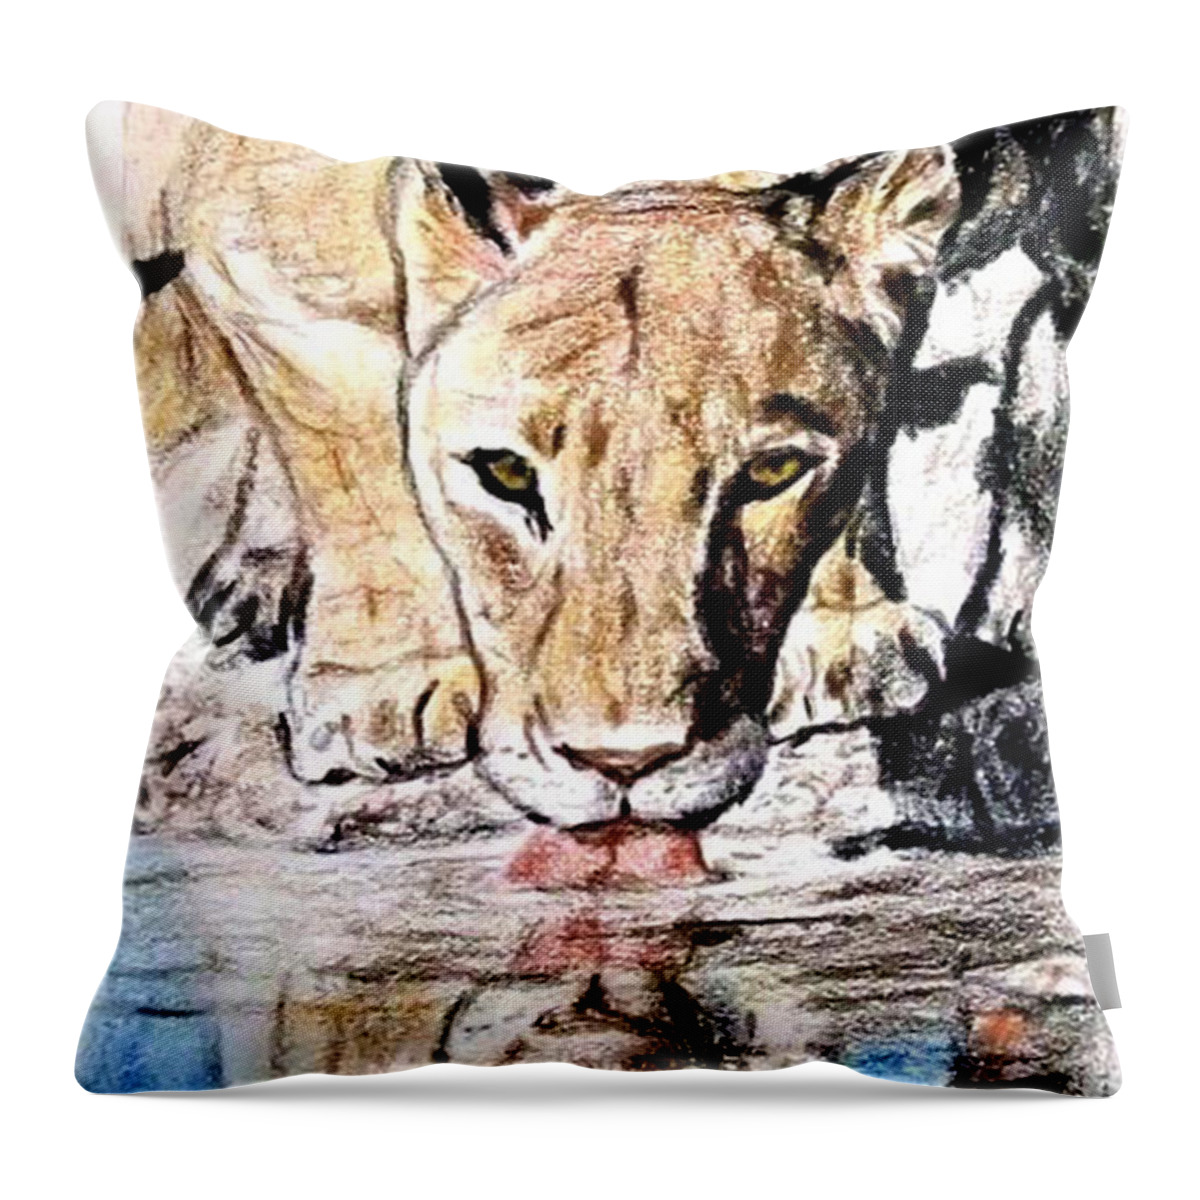 Jim Fitzpatrick Throw Pillow featuring the drawing Reflection of a Lioness Drinking from a Watering Hole by Jim Fitzpatrick